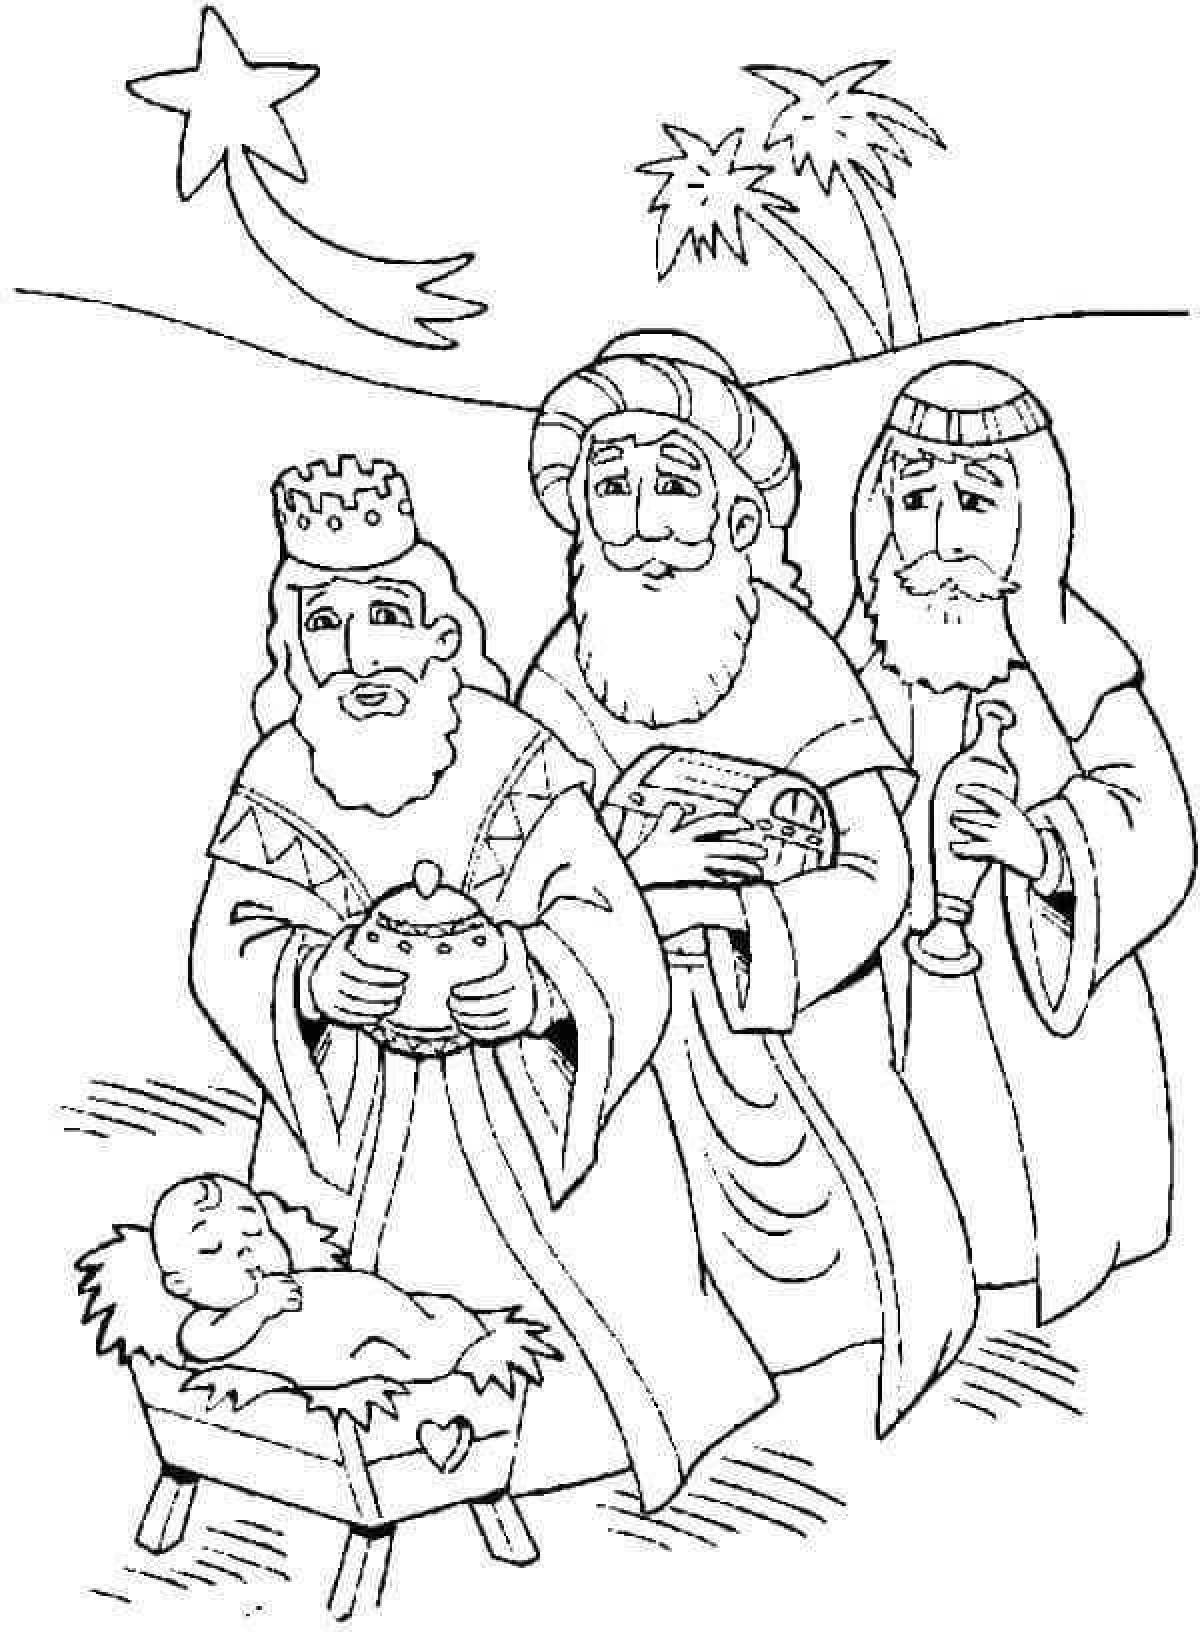 Christmas magic coloring book for Sunday school kids